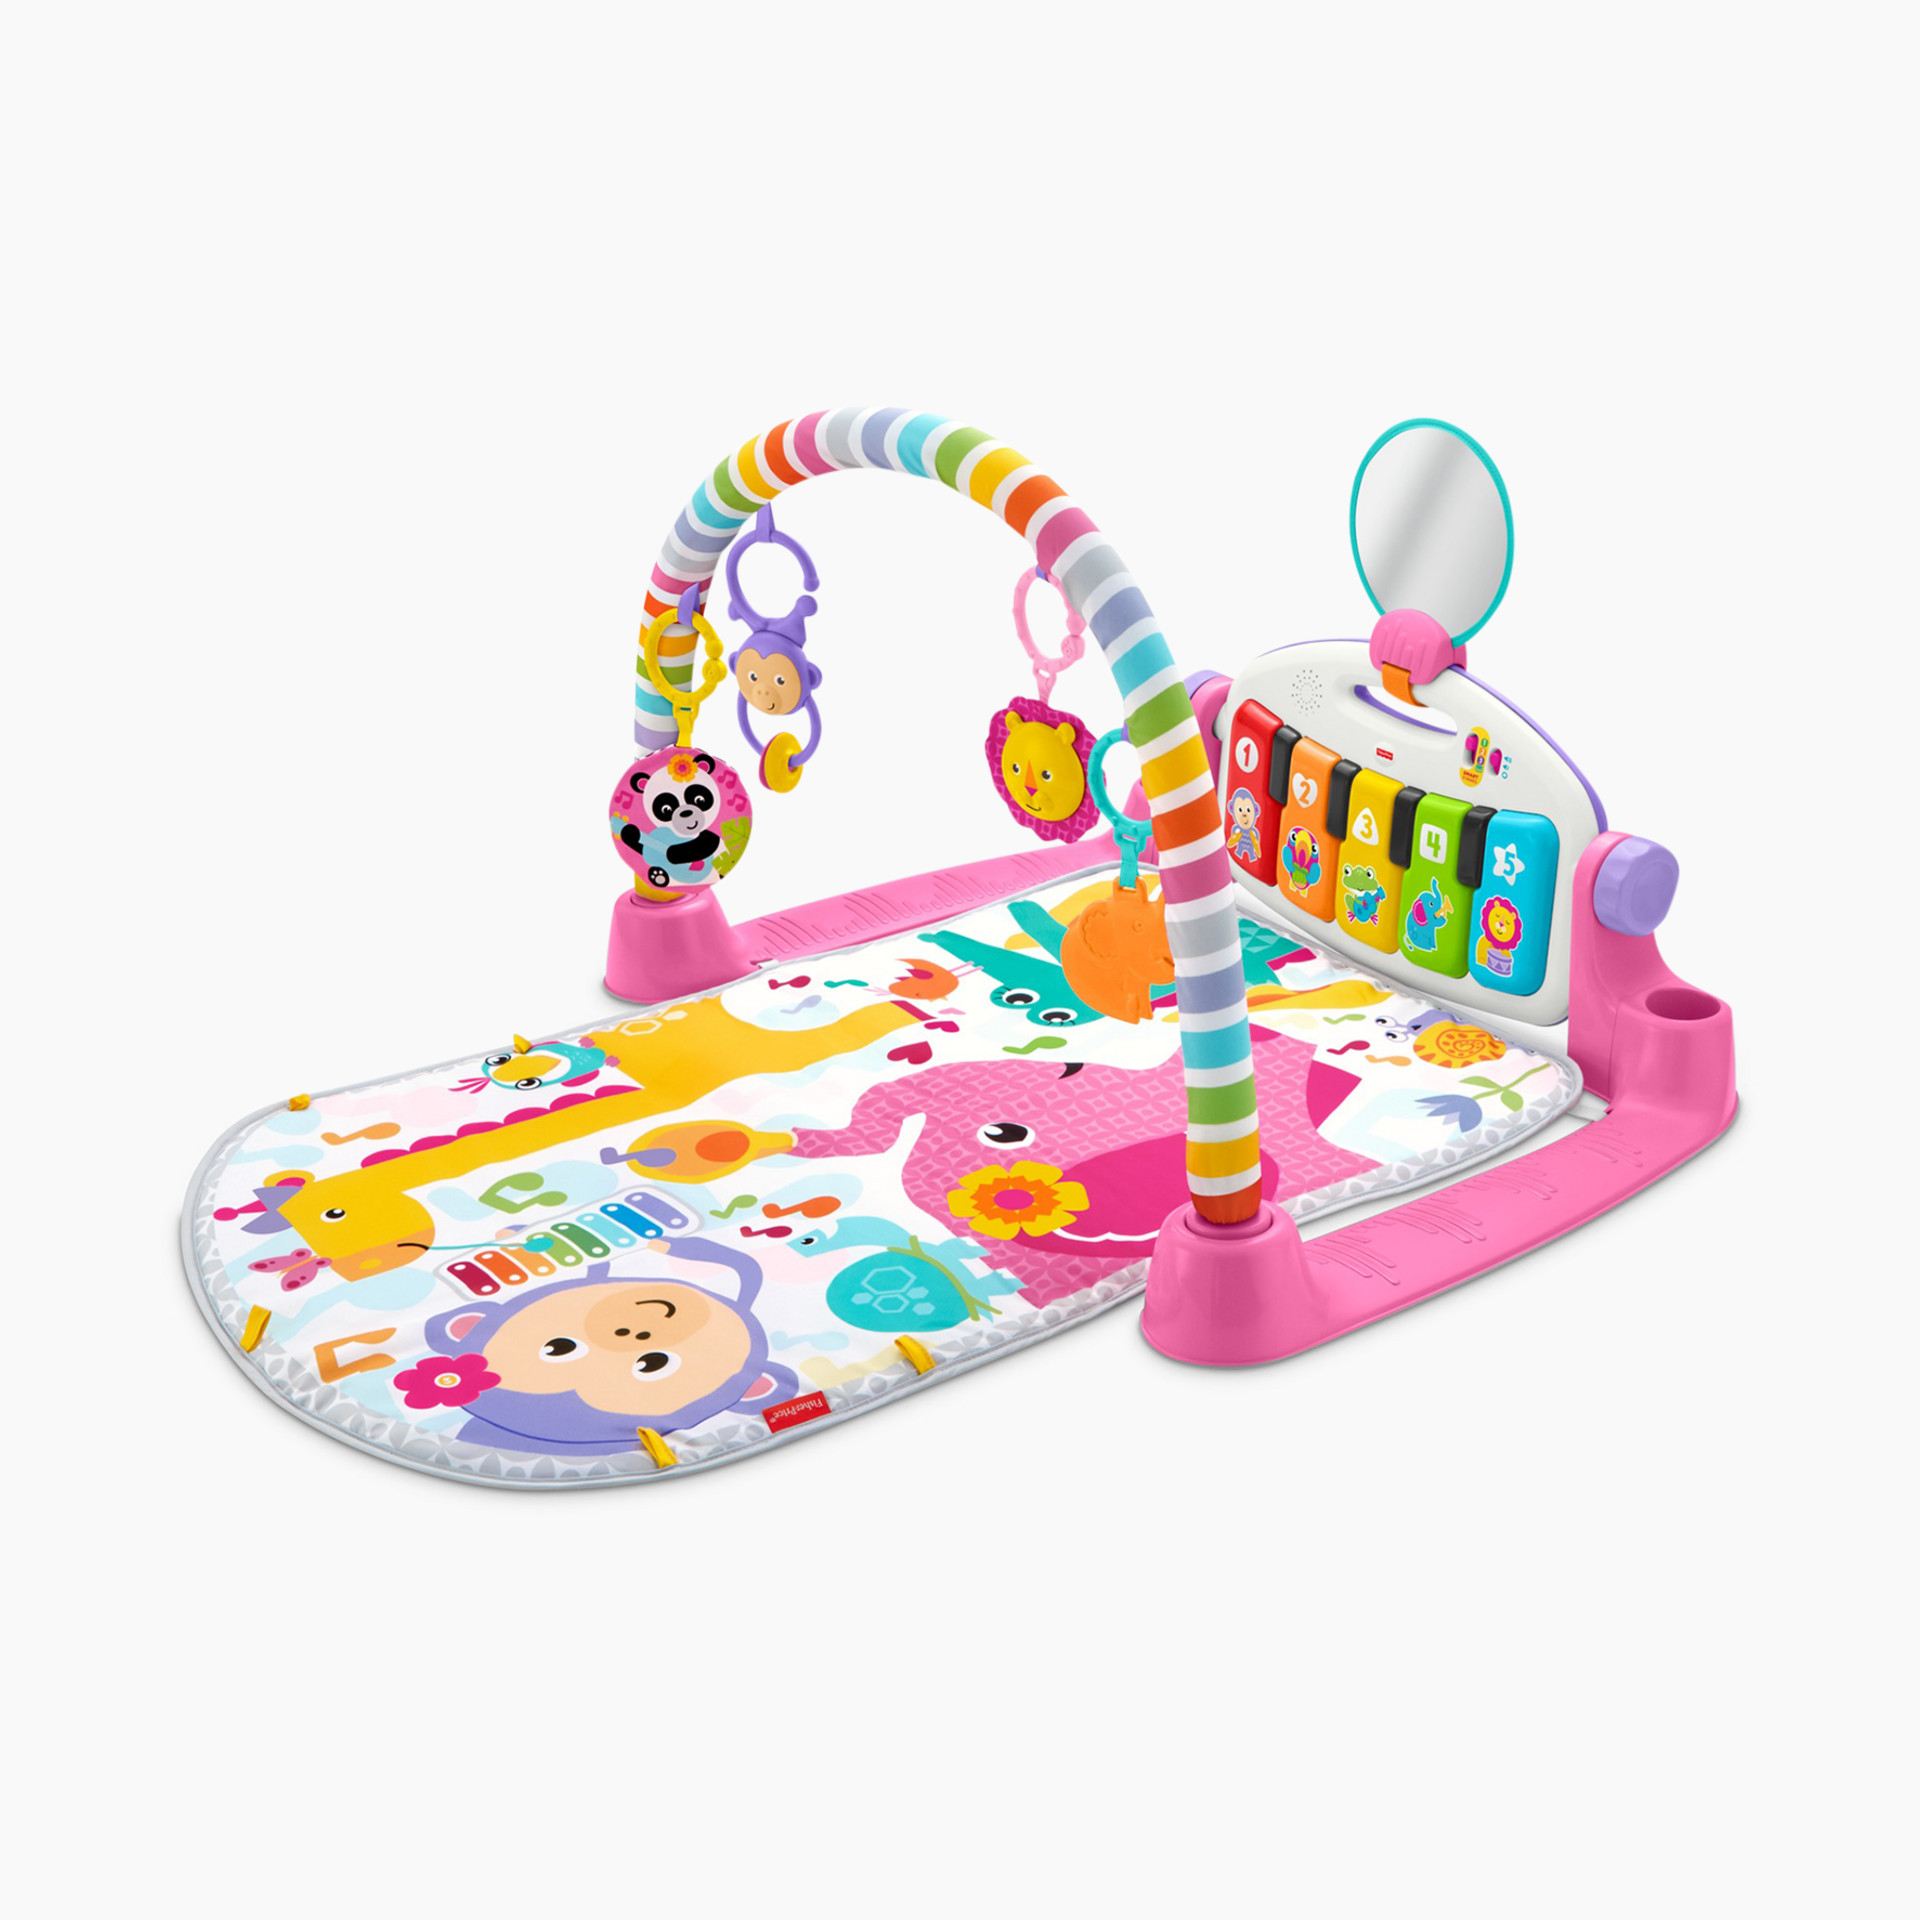 Fisher-Price Kick & Play Piano Gym review